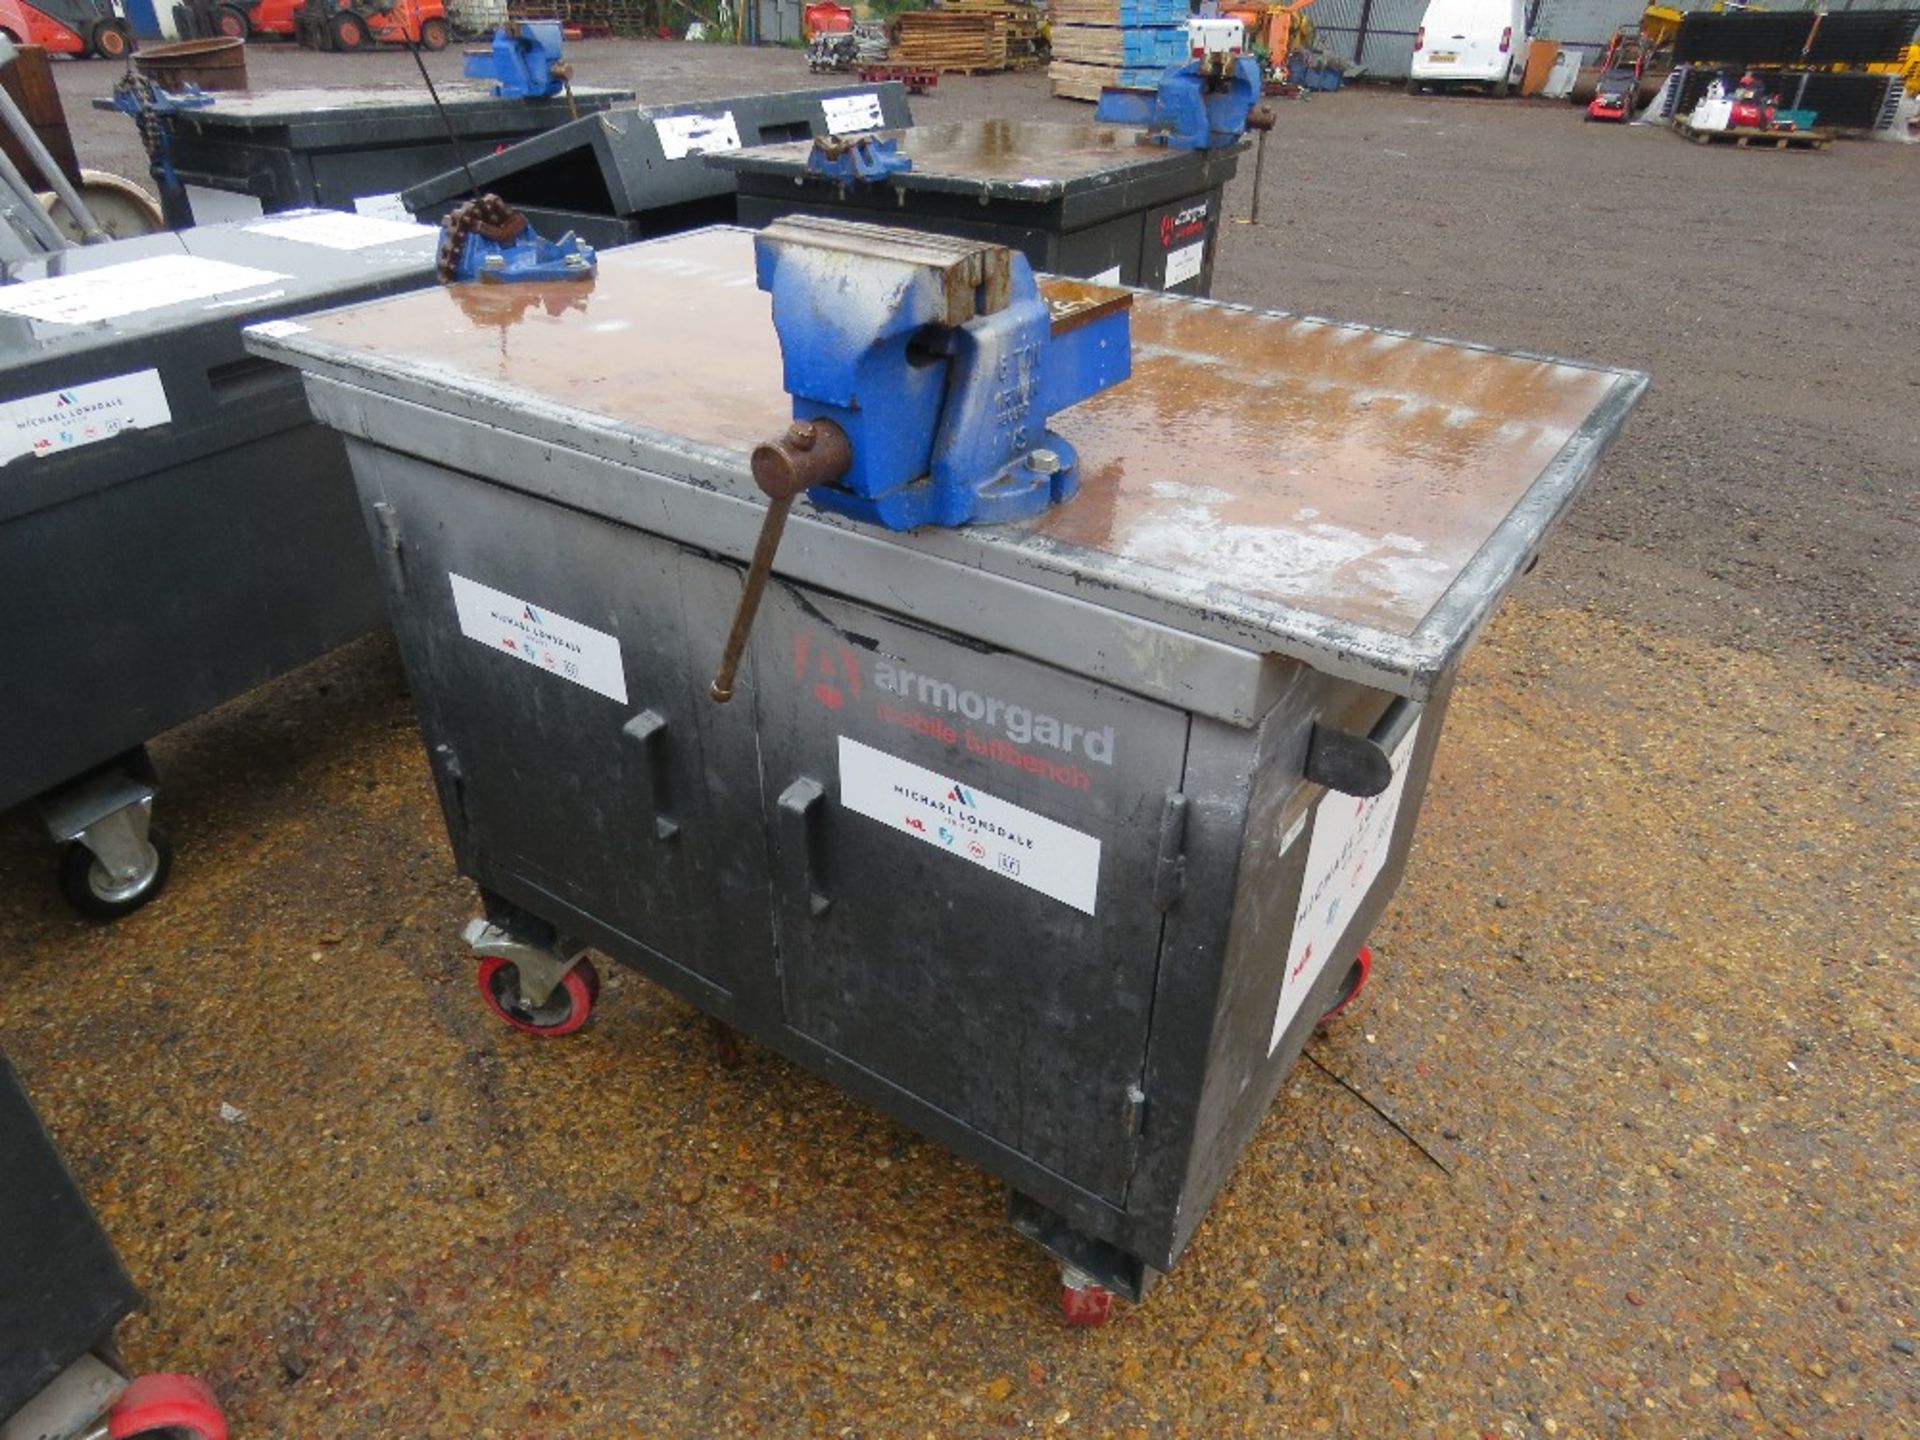 ARMORGARD MOBILE TUFFBENCH WORKBENCH WITH 2 VICES. NO KEYS. SOURCED FROM LARGE CONSTRUCTION COMPANY